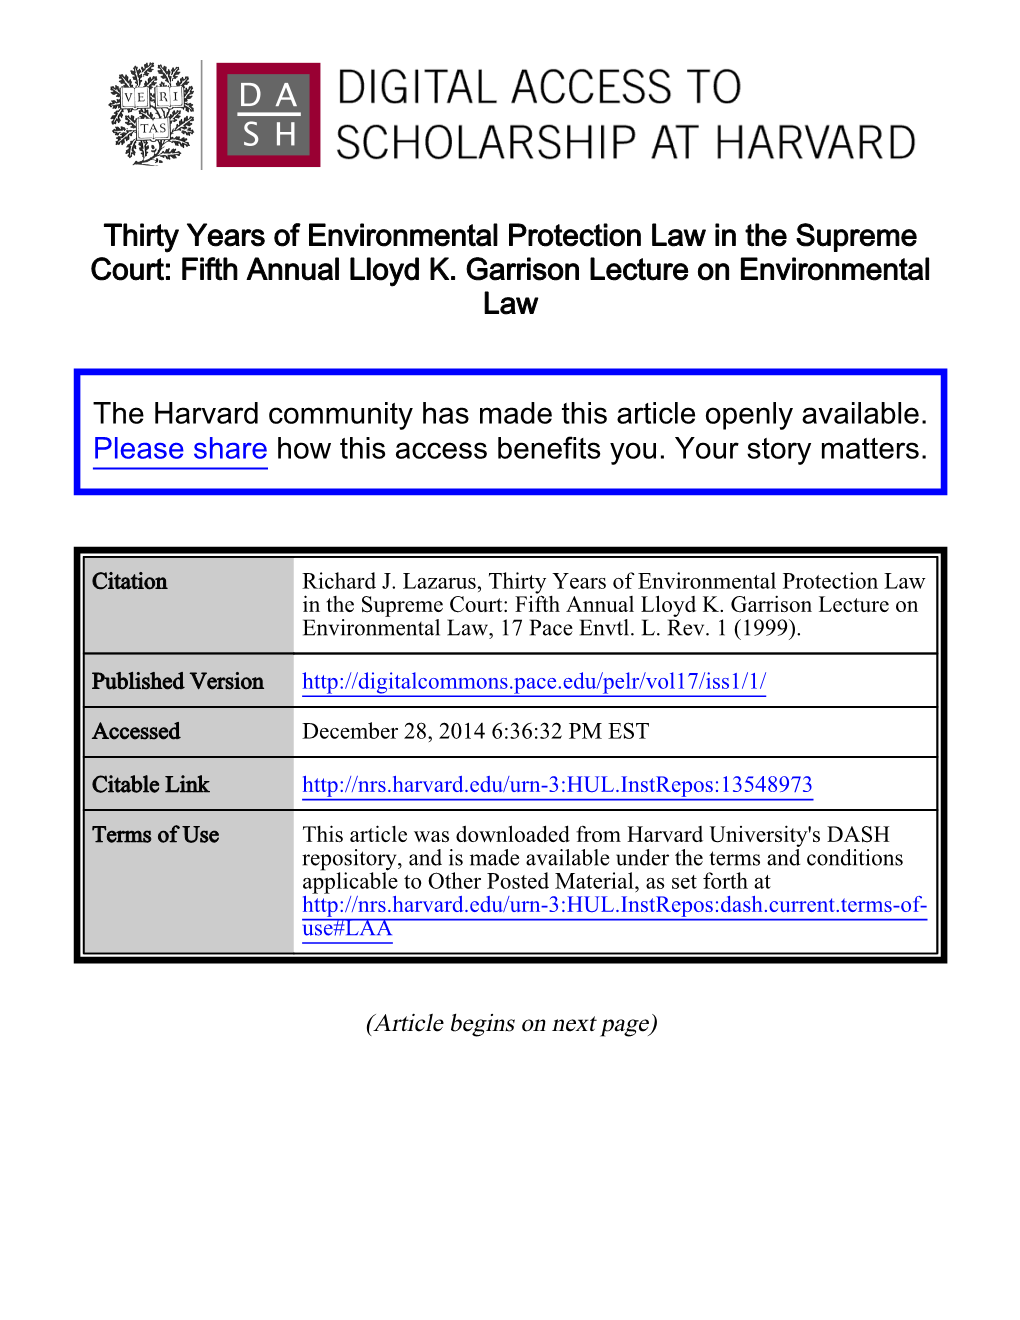 Thirty Years of Environmental Protection Law in the Supreme Court: Fifth Annual Lloyd K